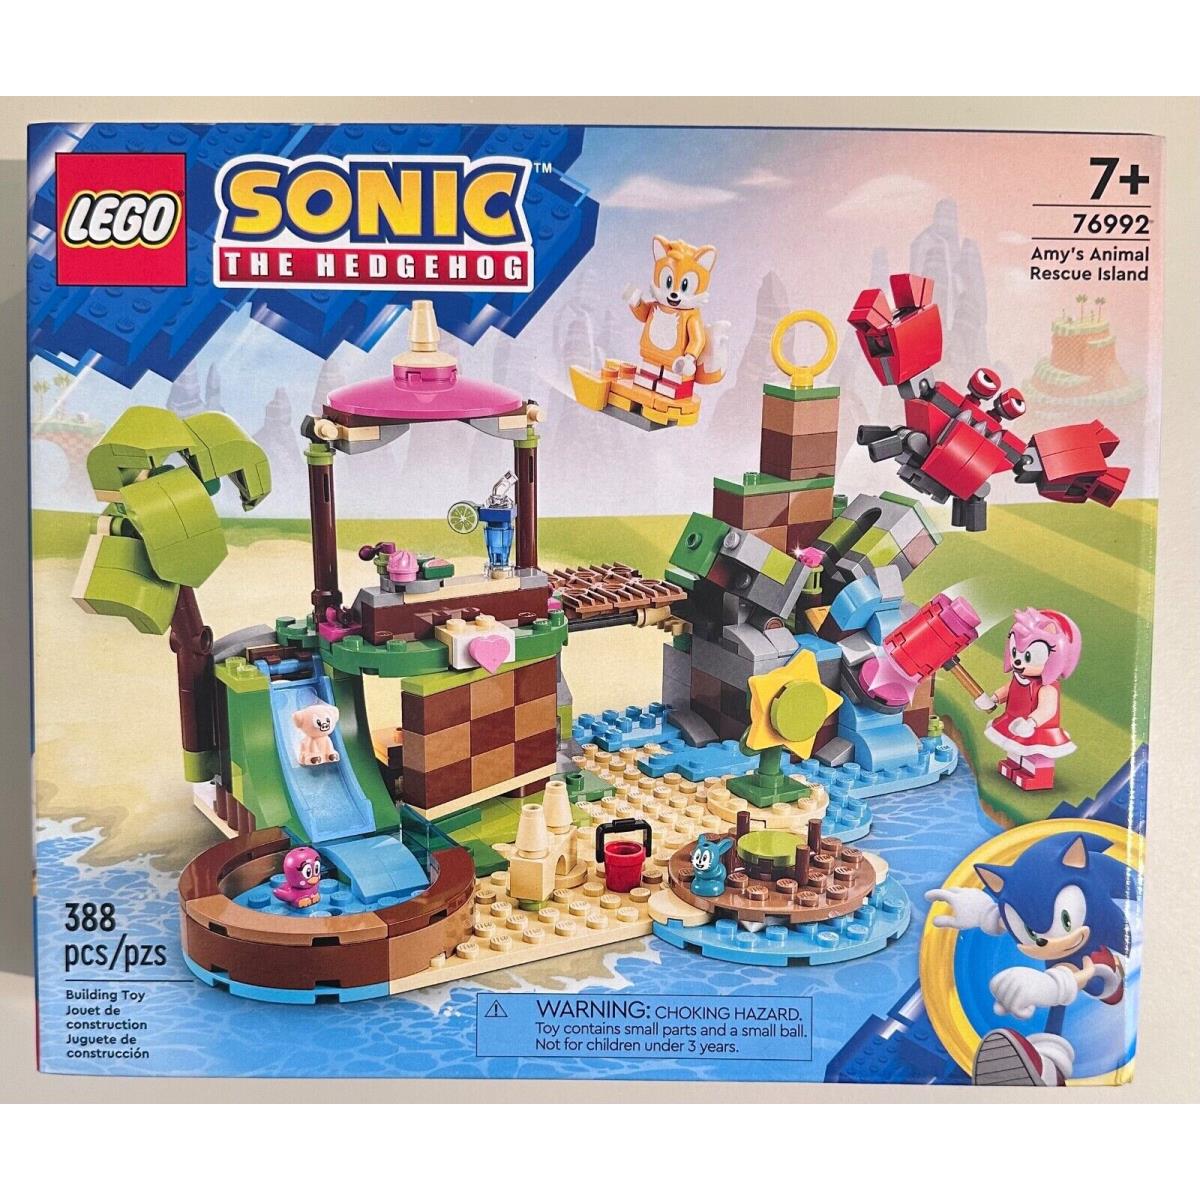 Lego Sonic The Hedgehog Amy s Animal Rescue Island 76992 Building Kit Toy Set